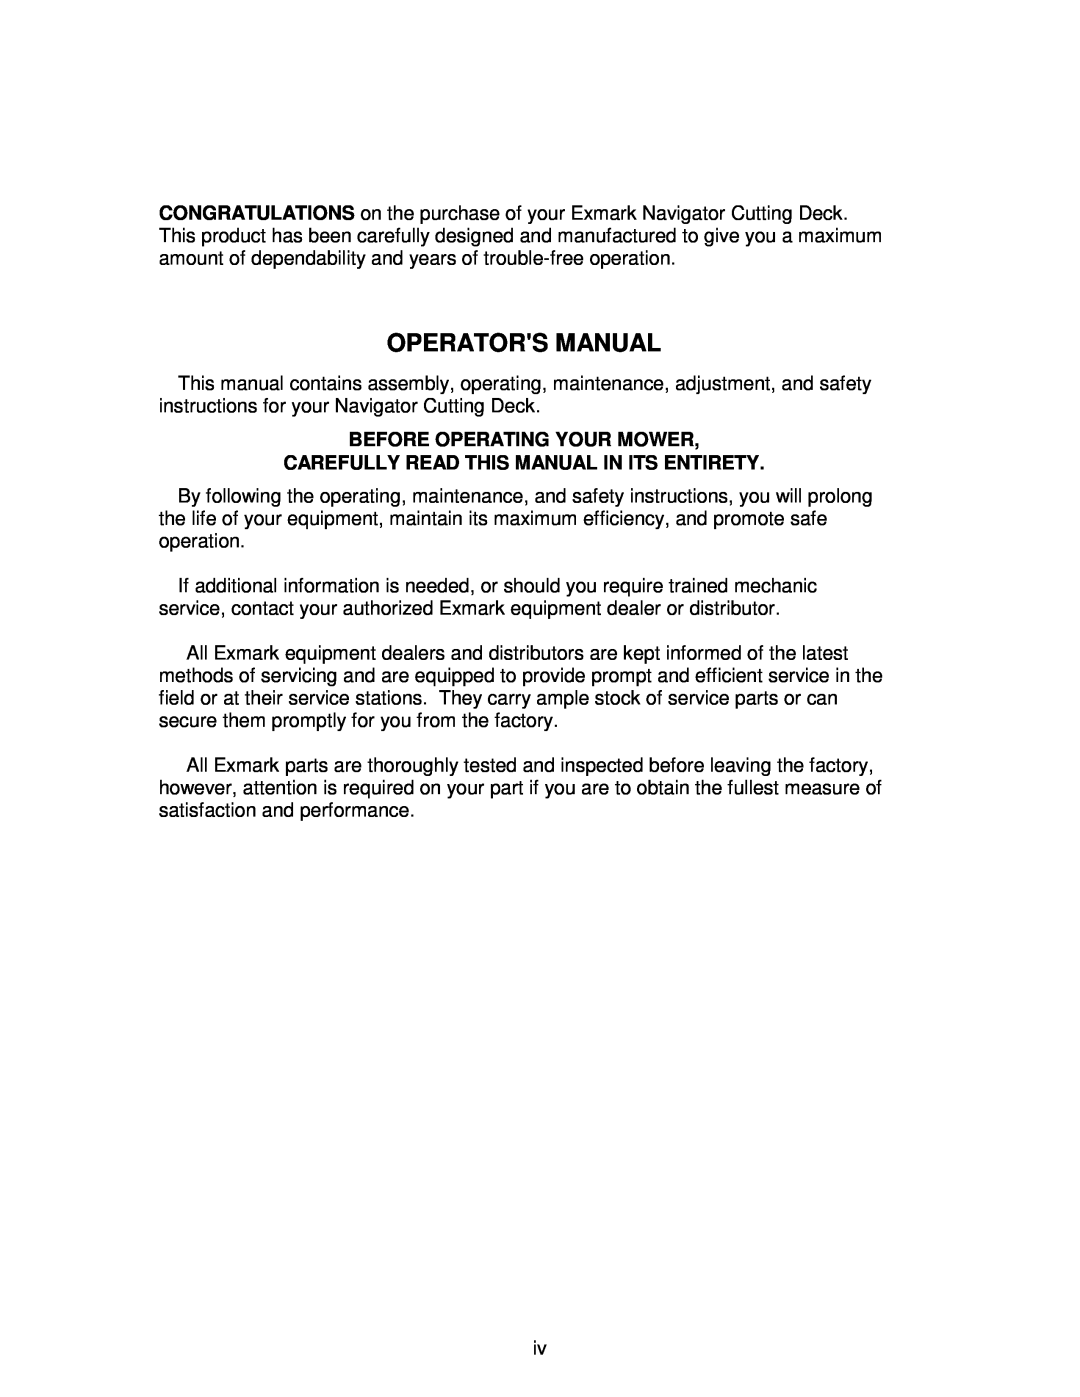 Exmark Cd42cd, Cd48cd, CD42CD Operators Manual, Before Operating Your Mower, Carefully Read This Manual In Its Entirety 